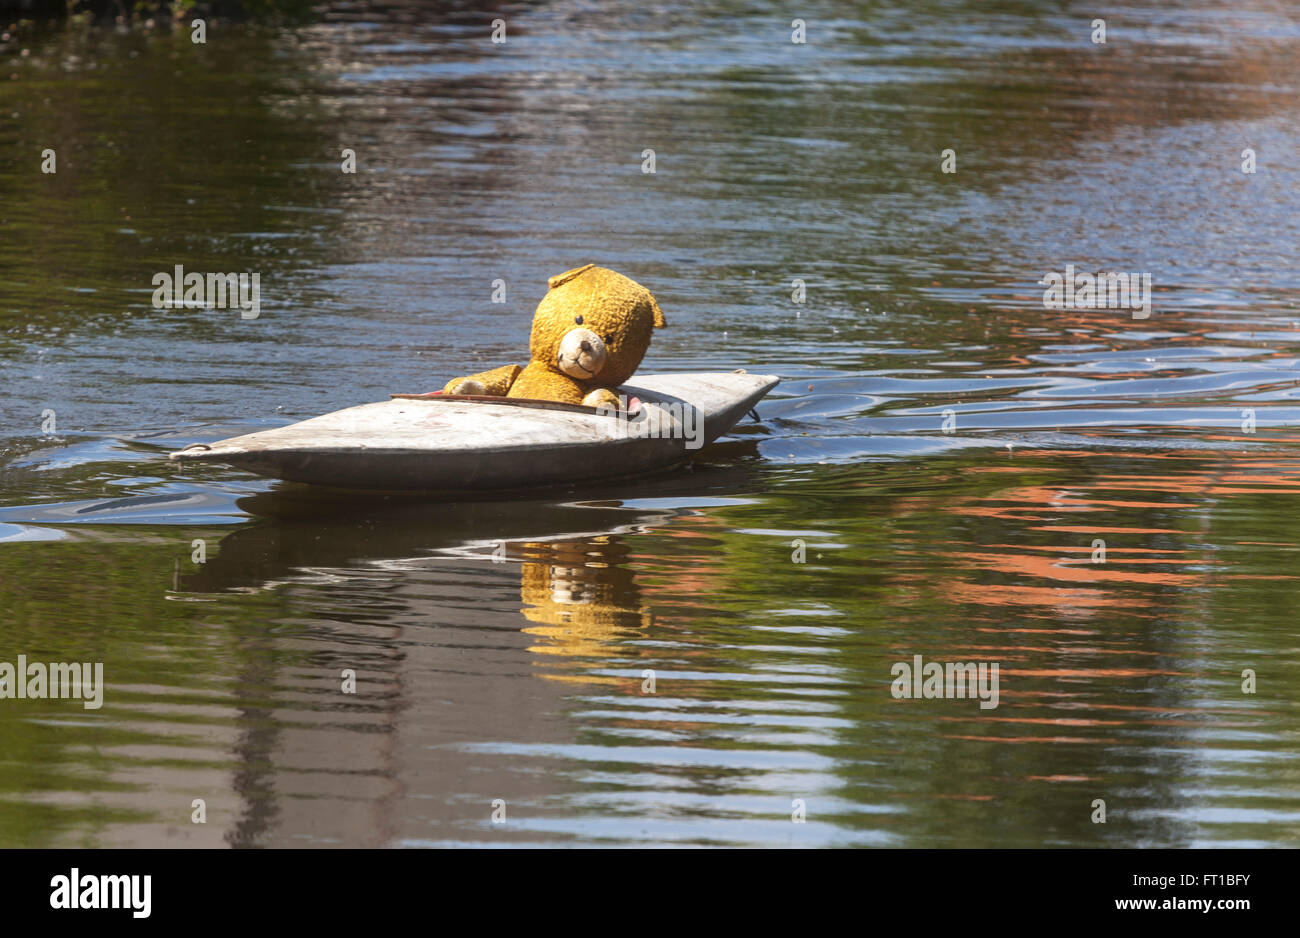 Teddy bear in vacation, sliding down a river in a kayak, Czech Republic Stock Photo